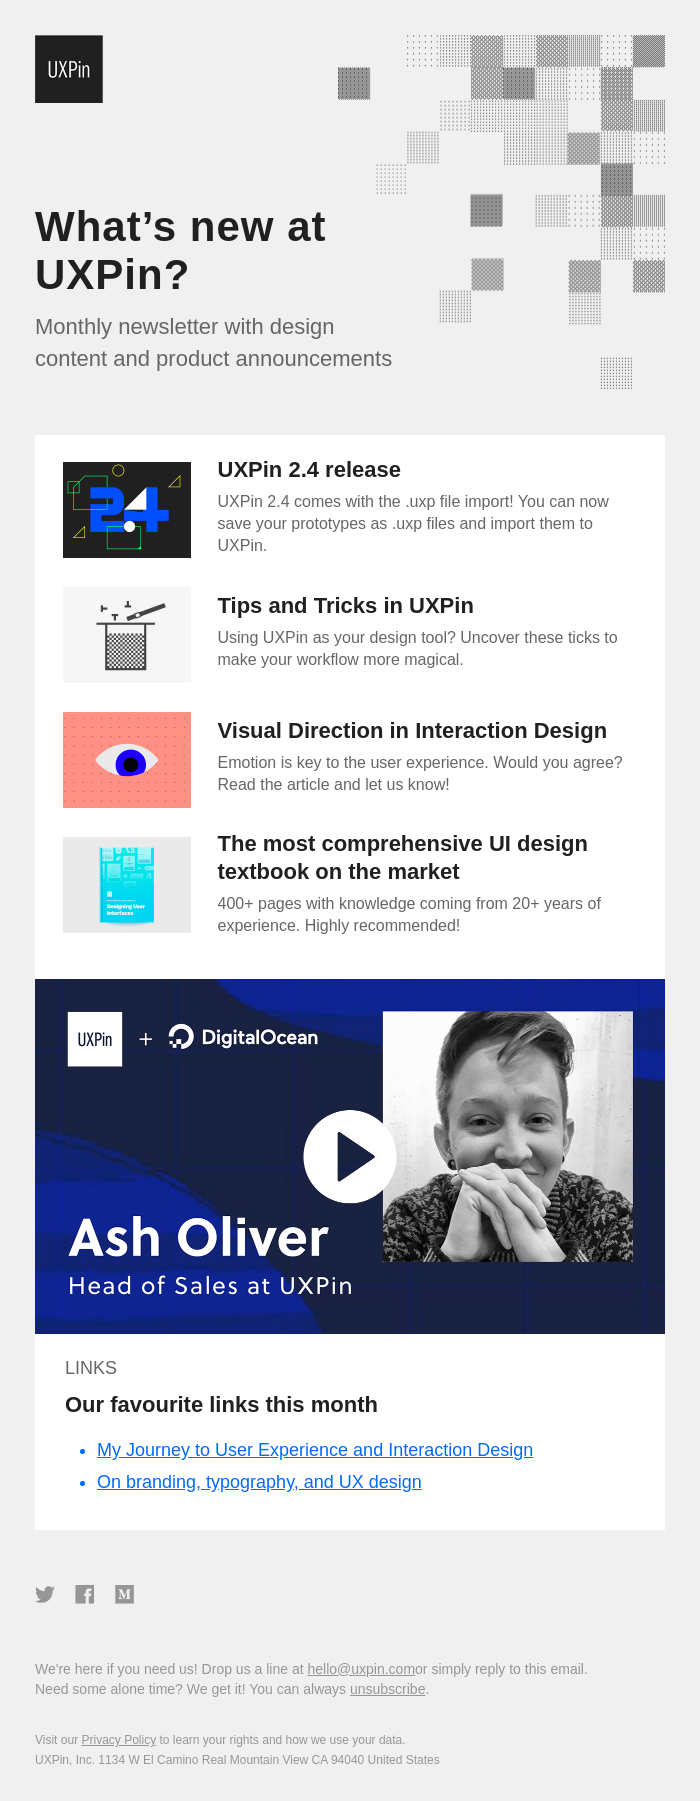 Your new favorite UI design handbook, remote prototyping, and more news from UXPin